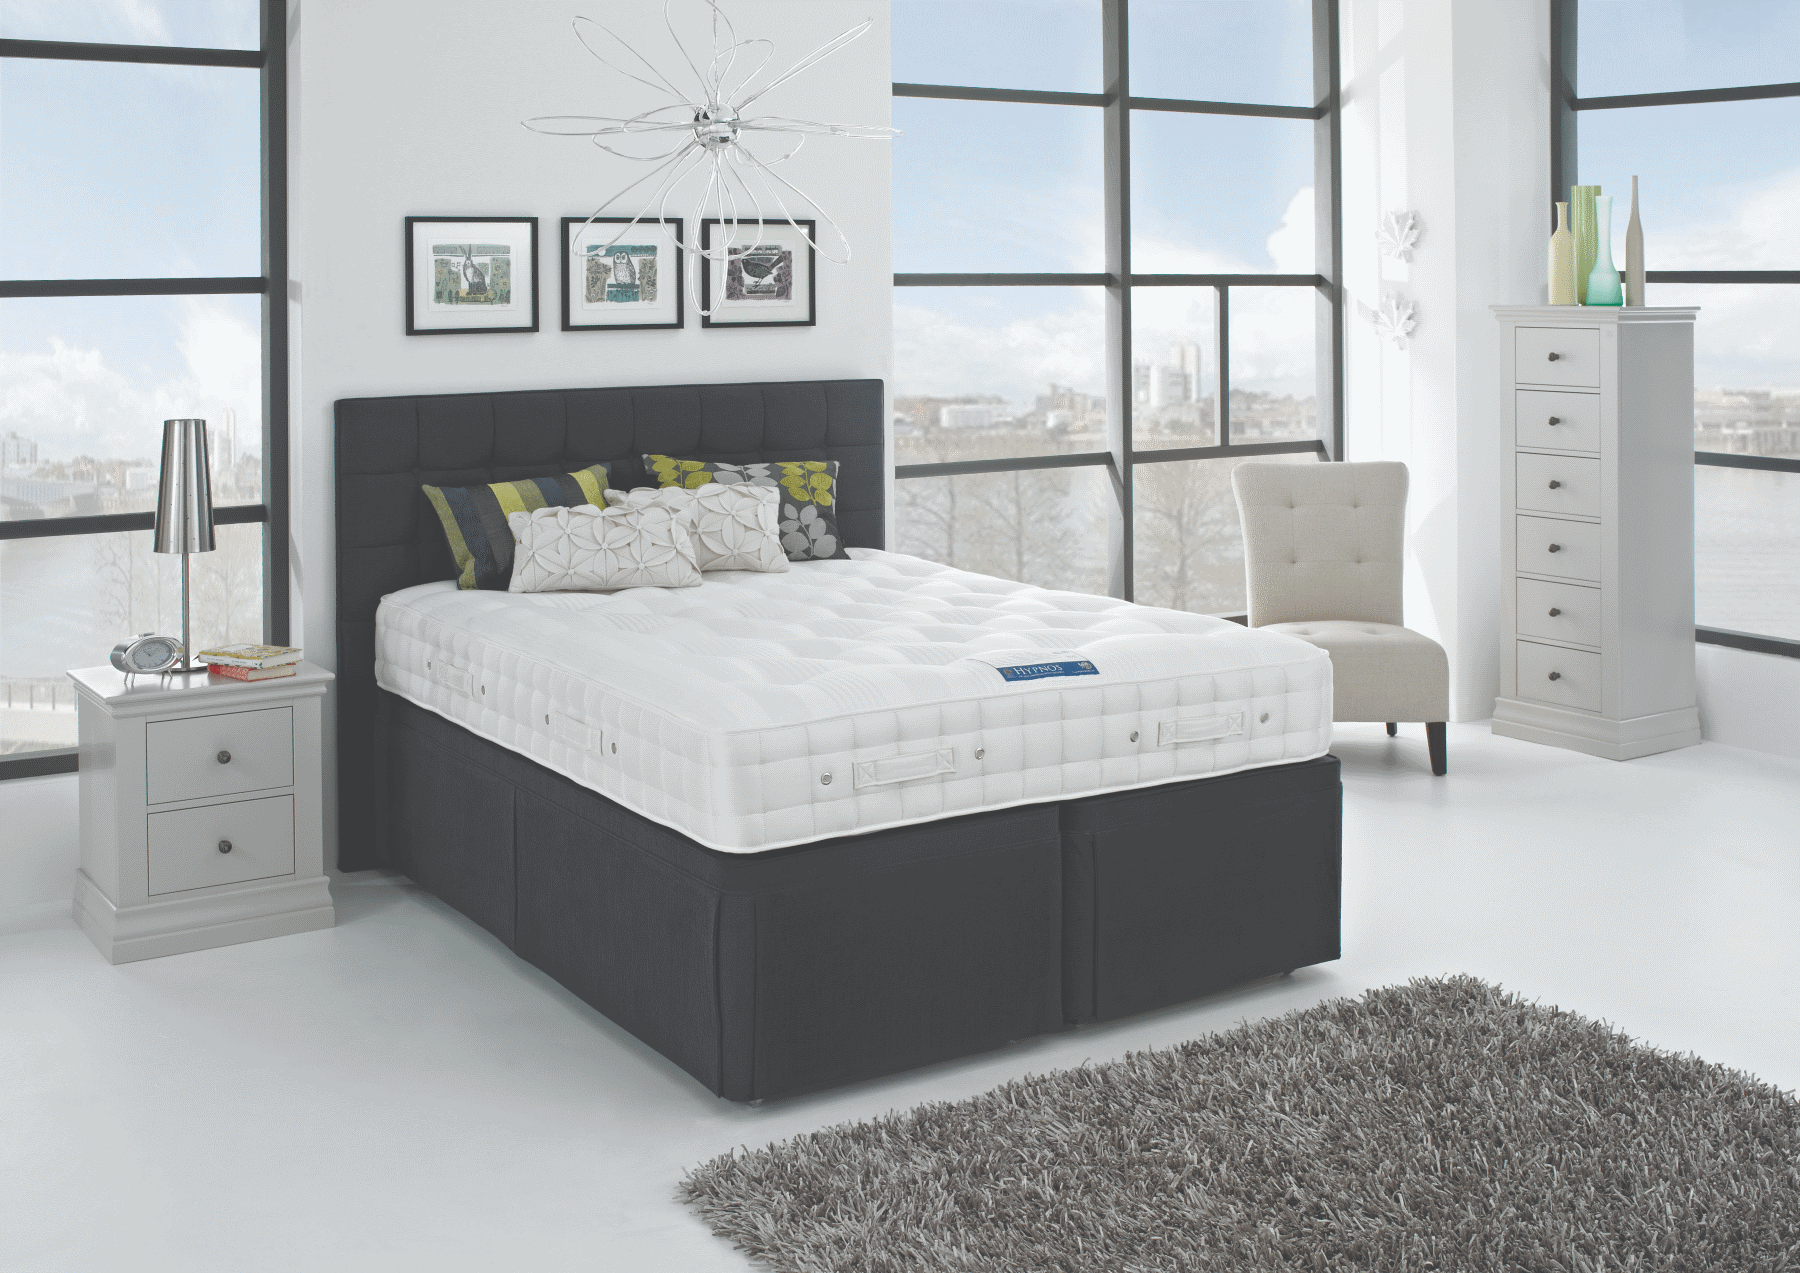 Hypnos Orthocare 10 Divan Bed